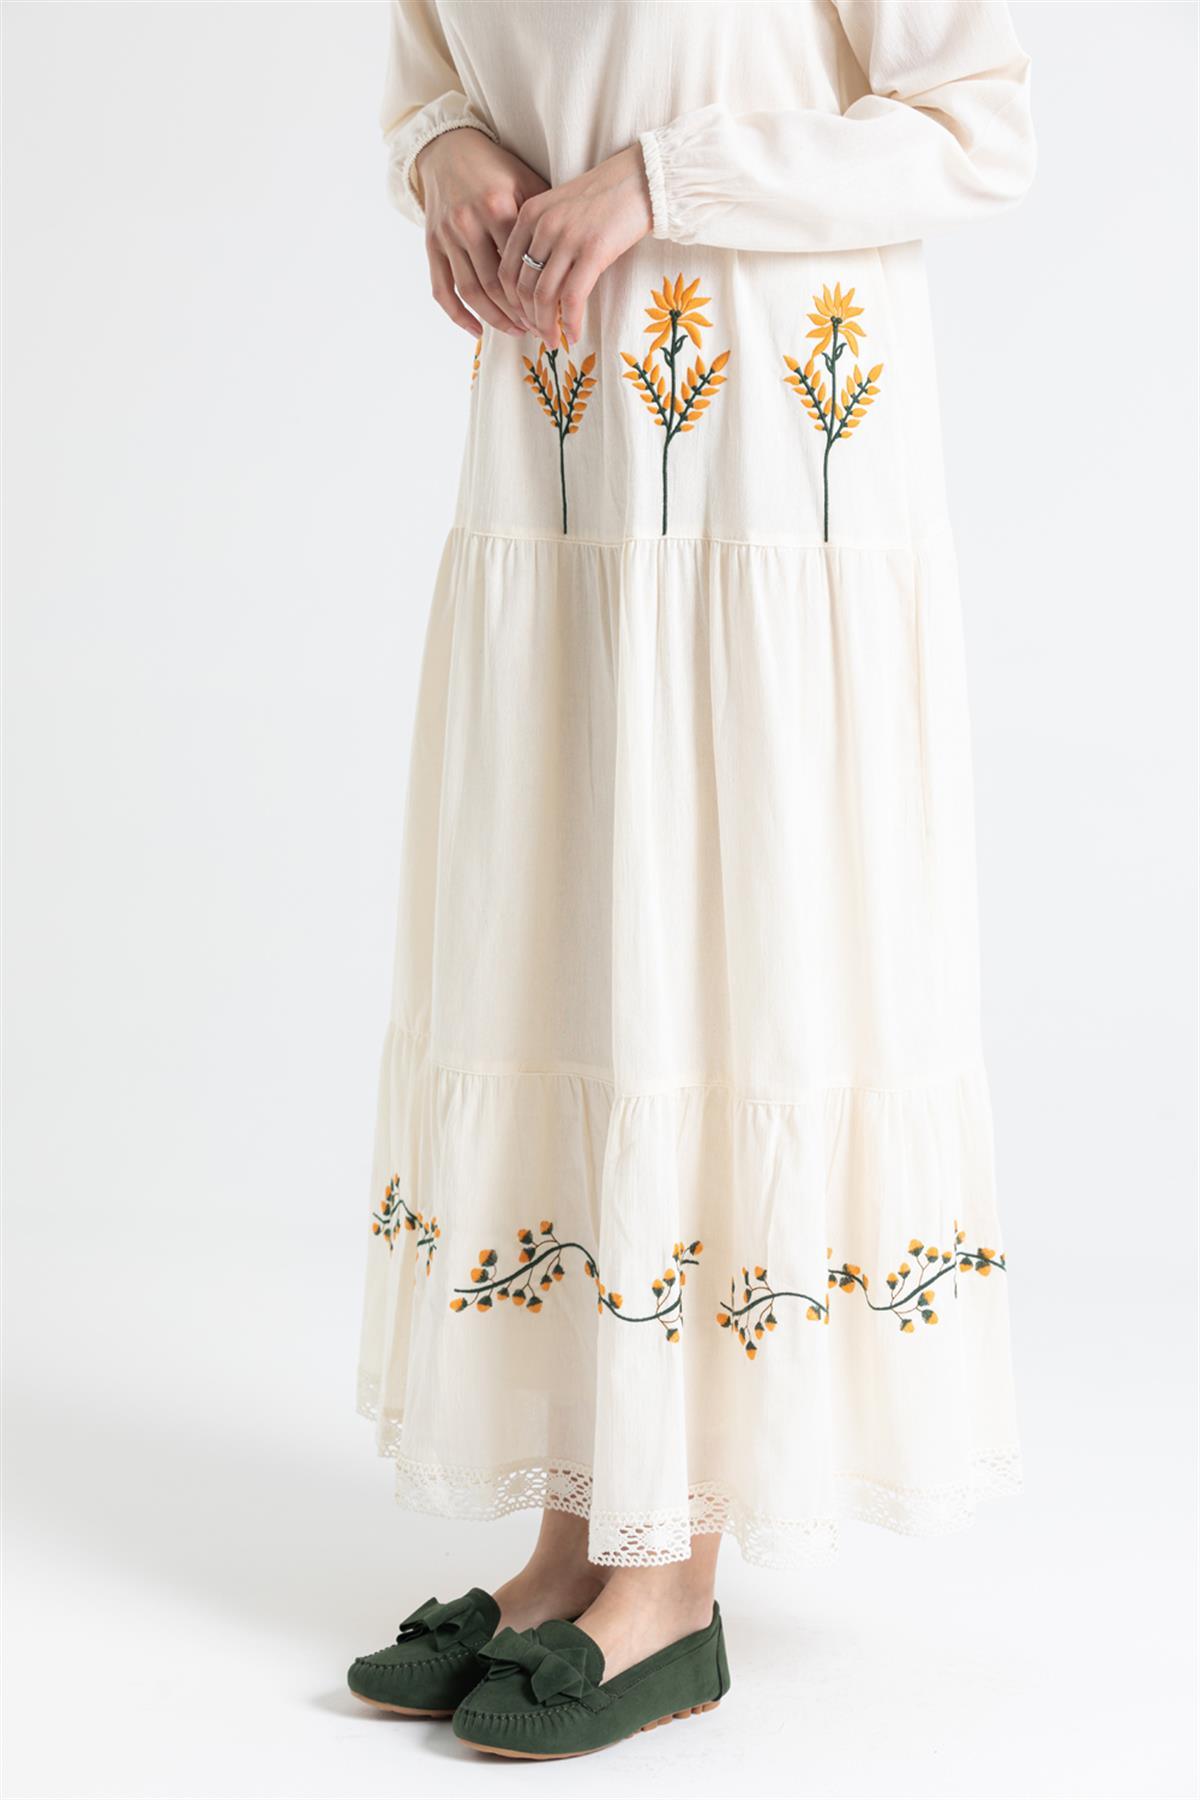 Long-sleeved Sile Cloth Dress With Floral Embroidery And Guipure Lace Detail At The Hem - trendynow